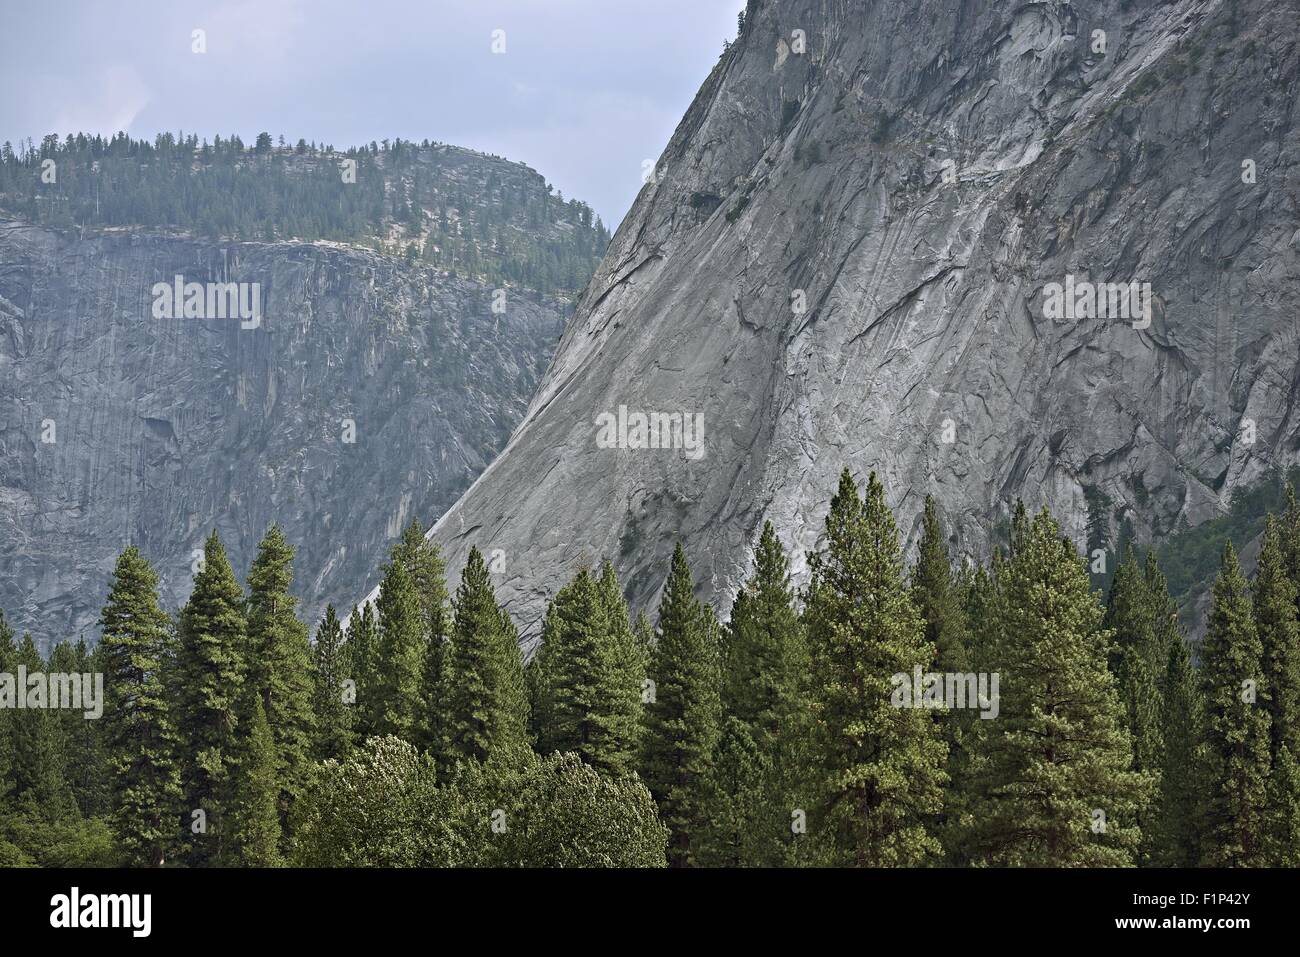 Yosemite Valley Scenery. North American Yosemite National Park in California. American National Parks Photo Collection. Stock Photo